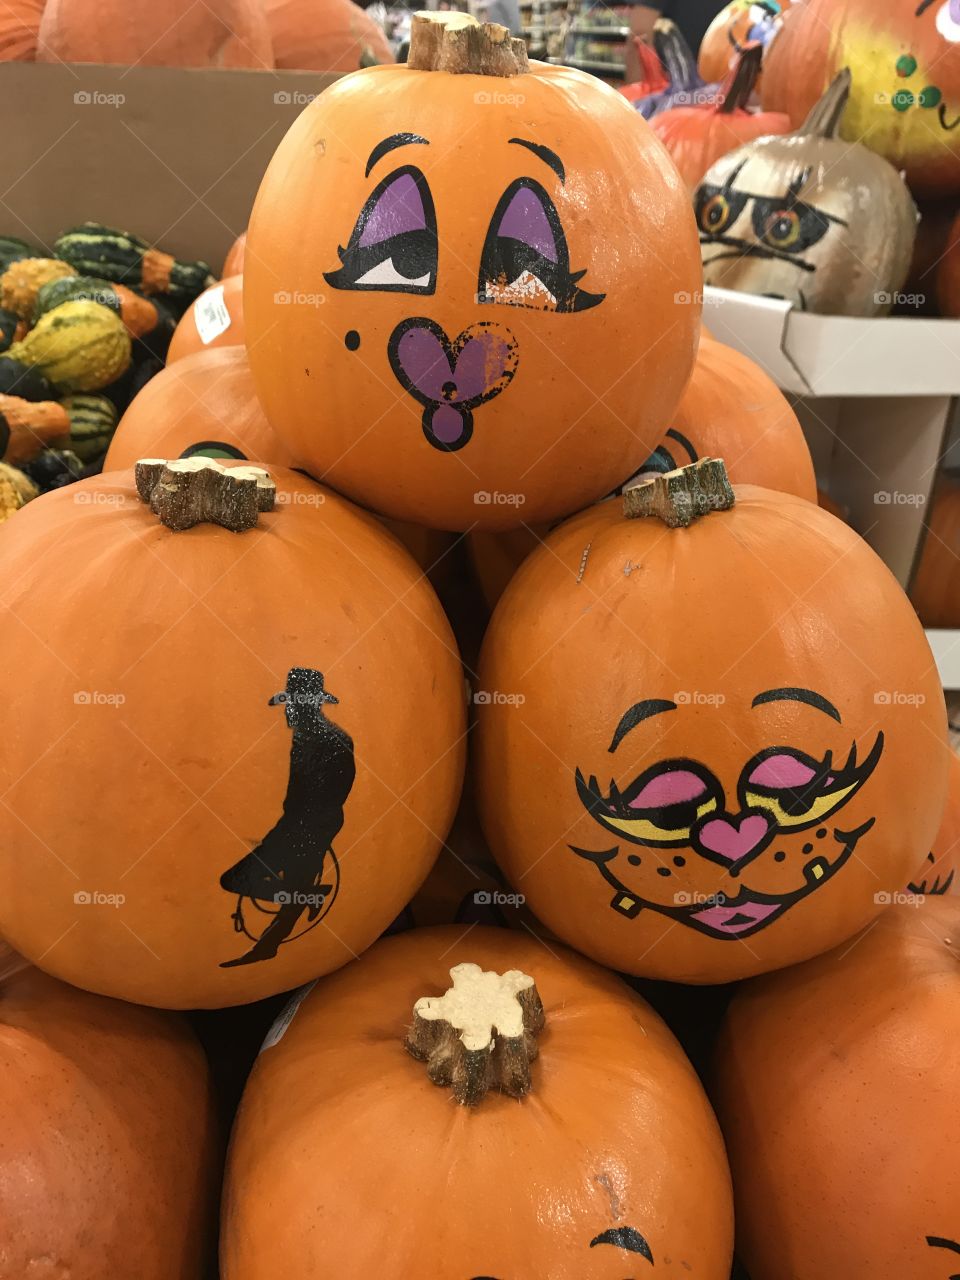 Pumpkins decorated for Halloween